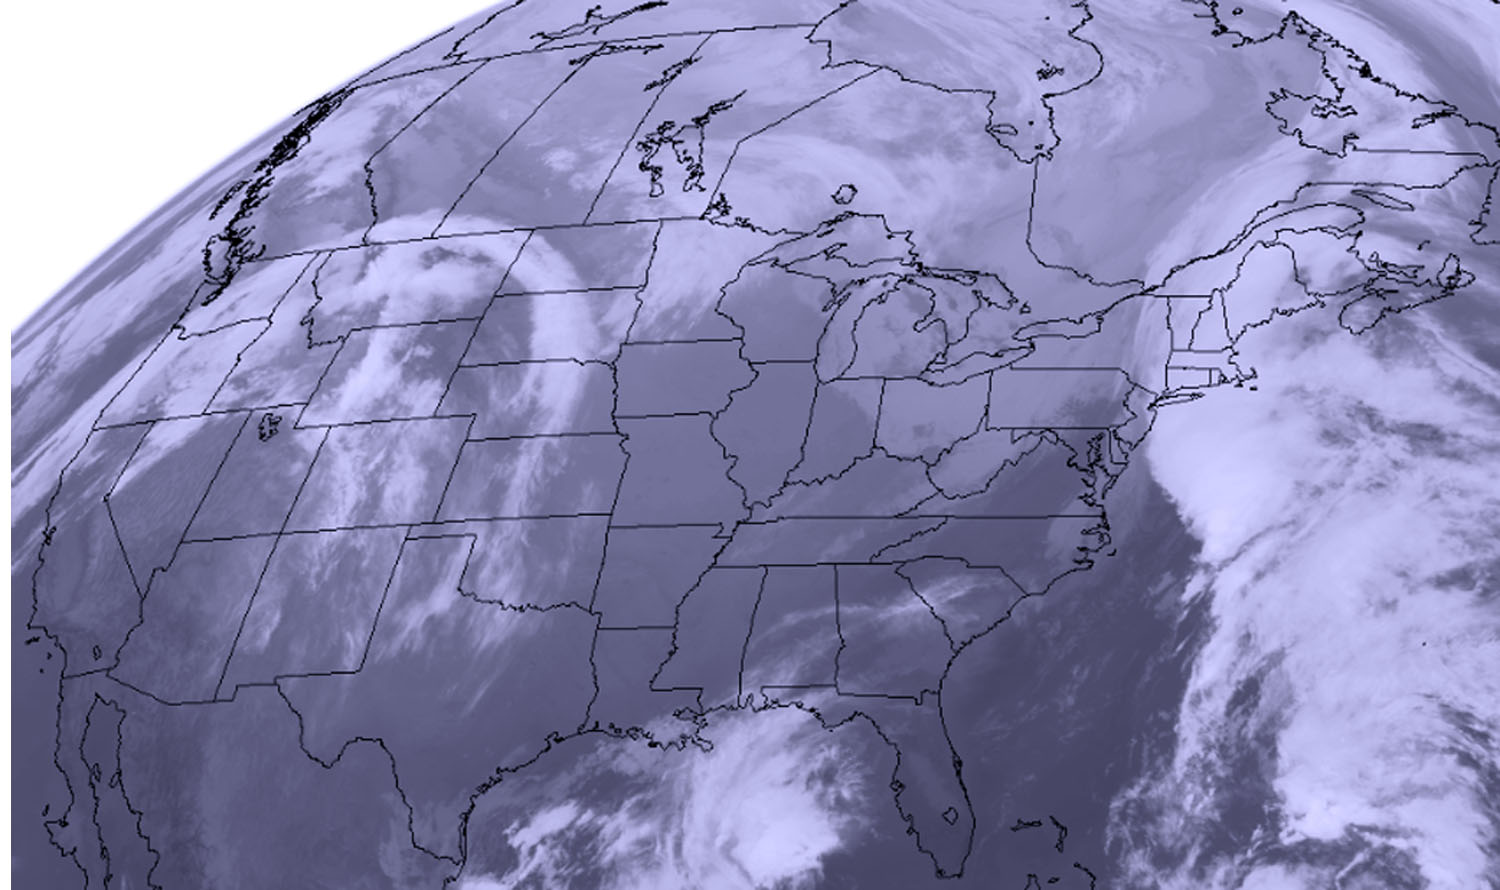 GOES-East image of storms over U.S.